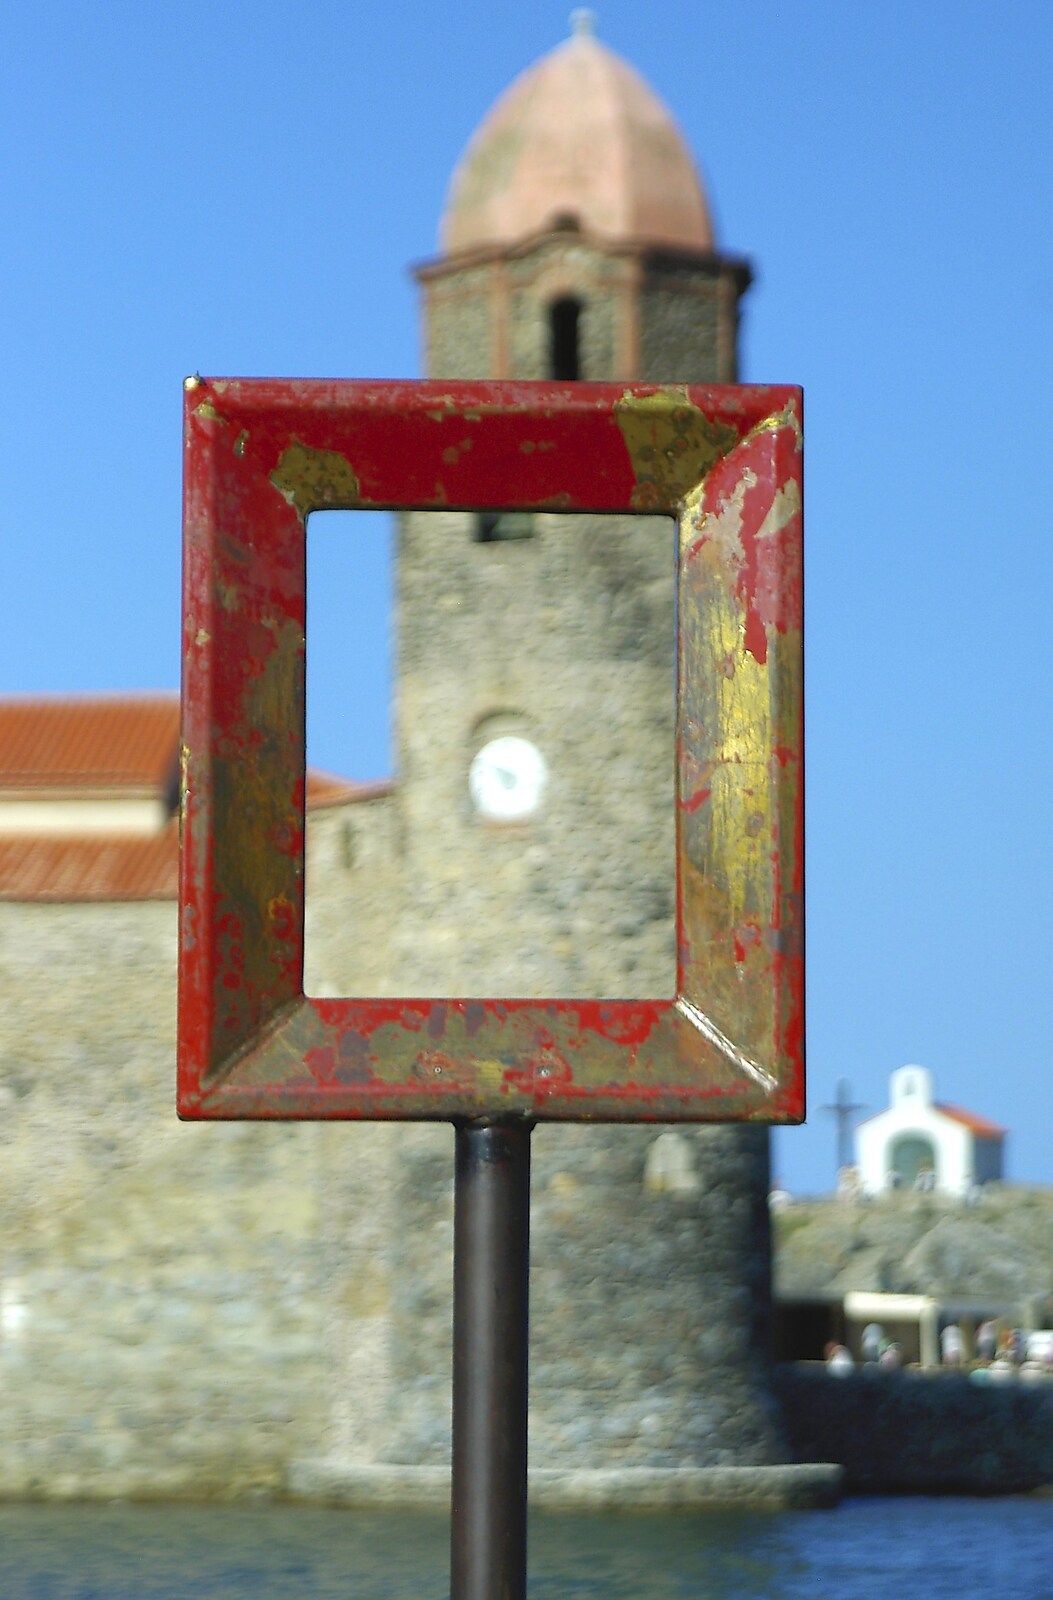 A picture-frame-on-a-stick picks out a clock from The Colourful Boats of Collioure, France - 20th September 2006